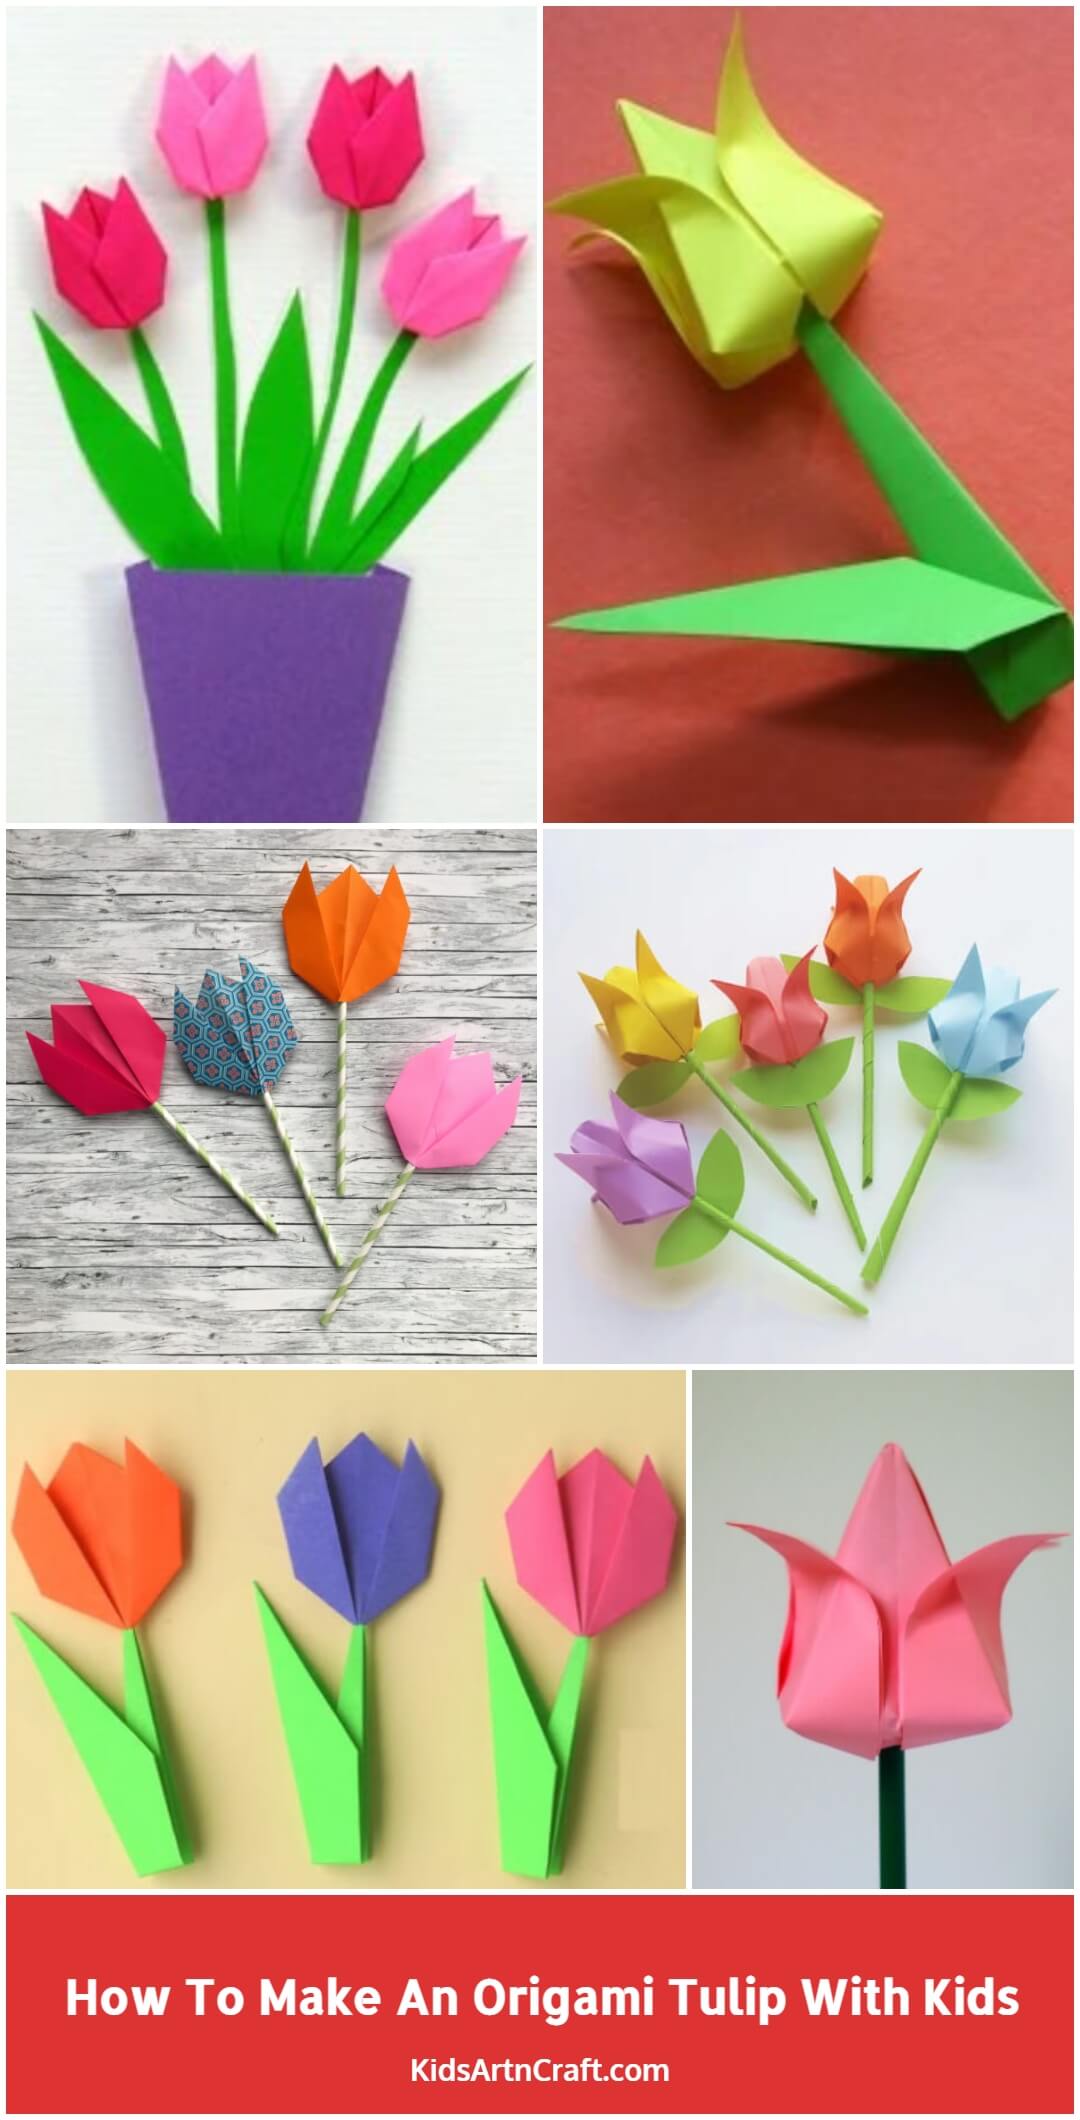 How To Make An Origami Tulip With Kids